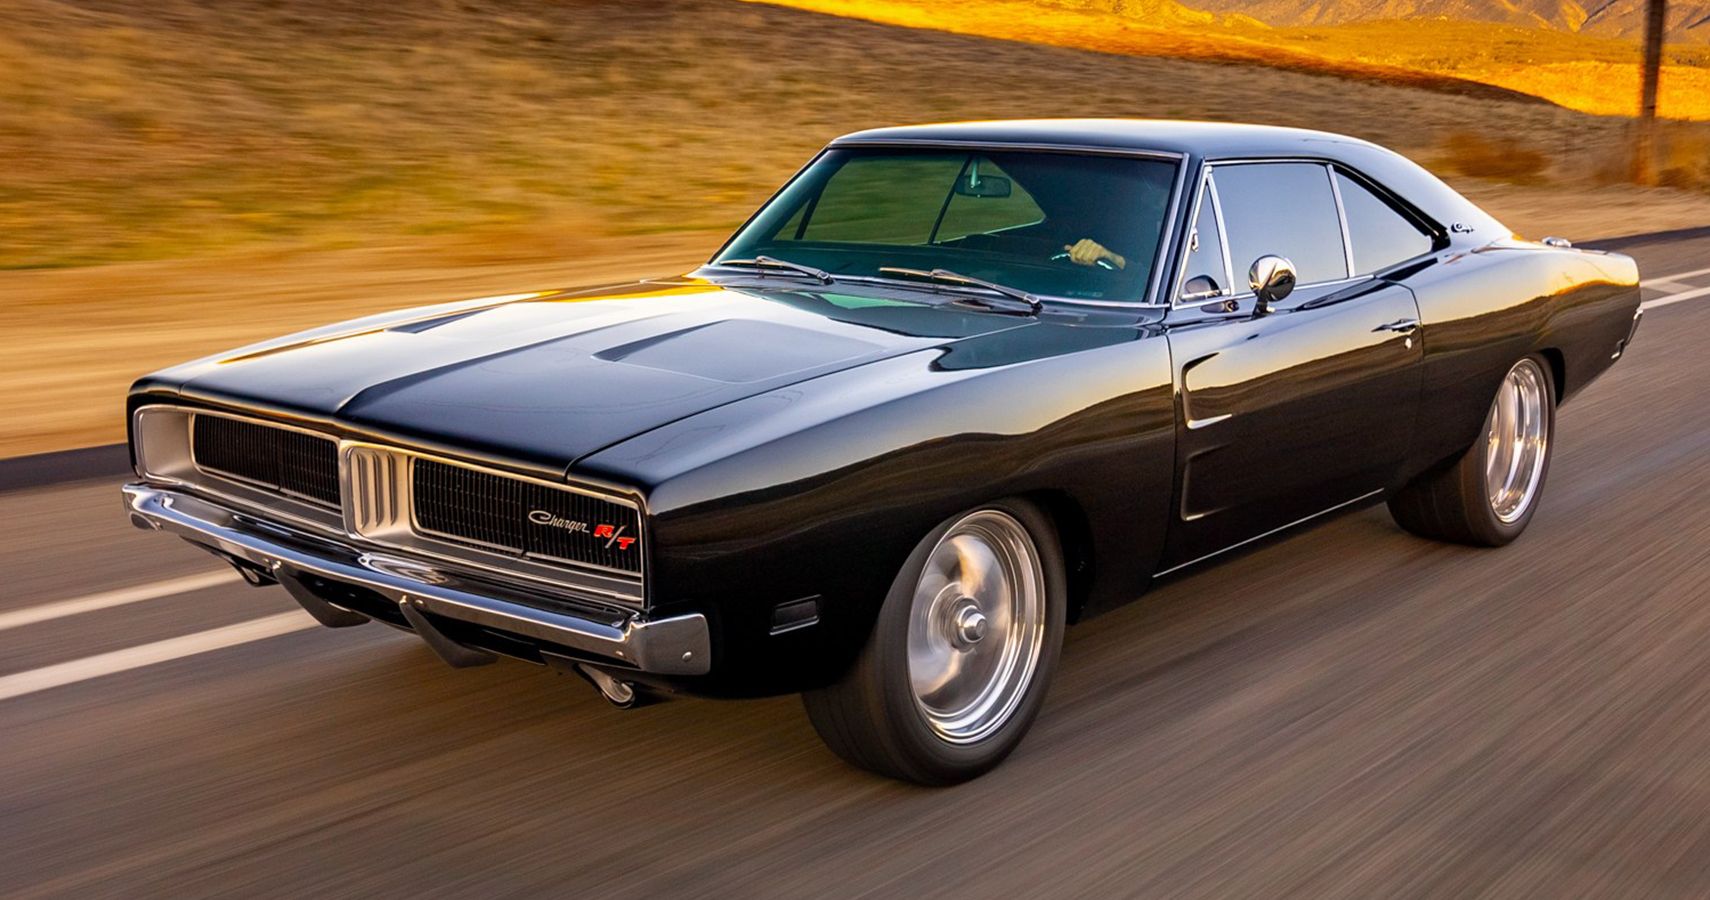 Classic Dodge Charger Dazzles Sporting New Metallic Black Paint